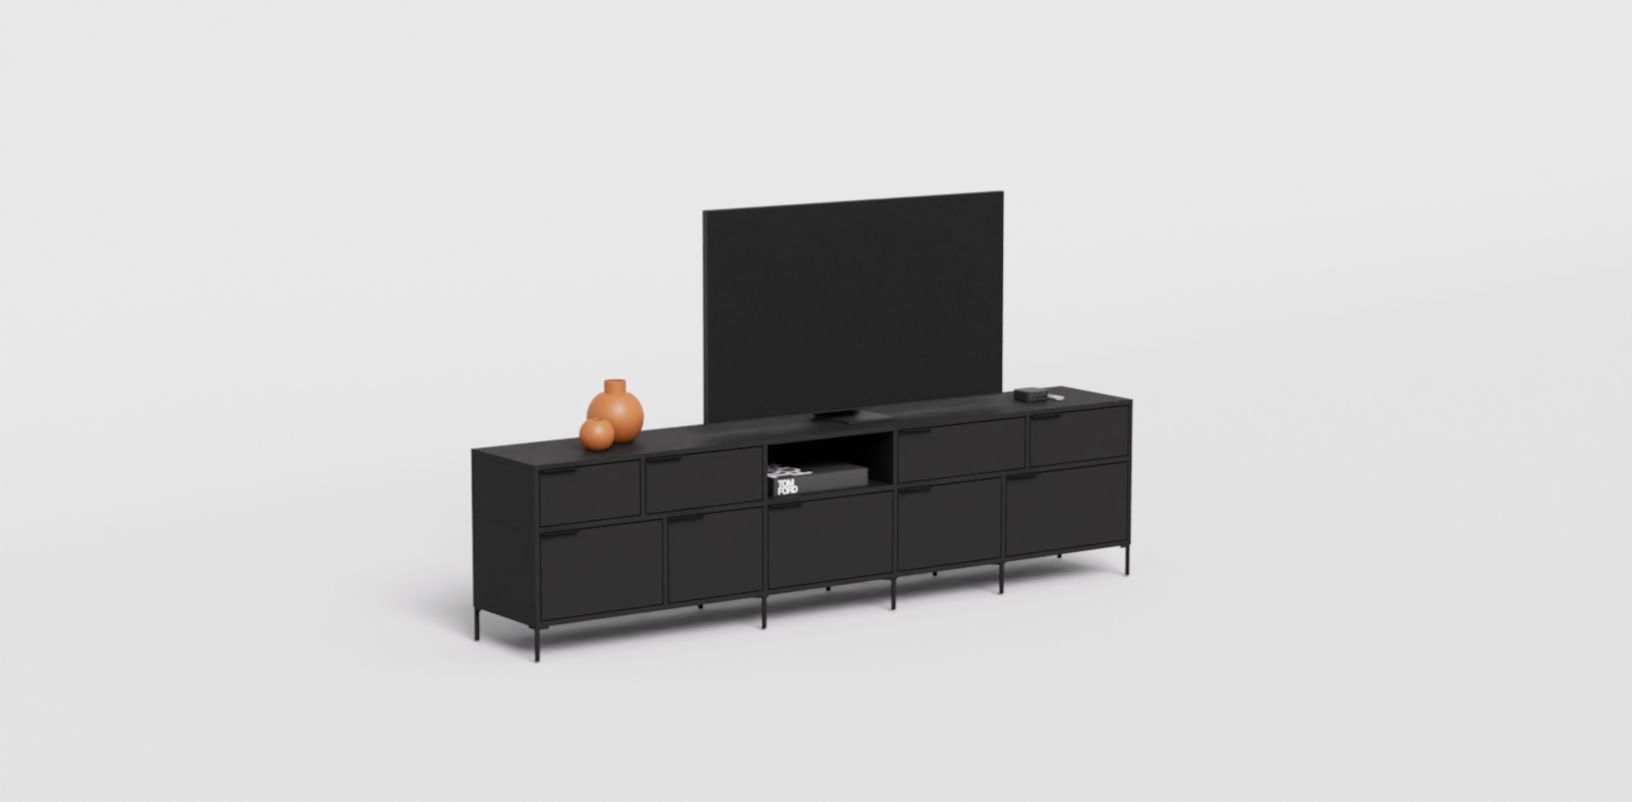 TV stand in Black with Drawers